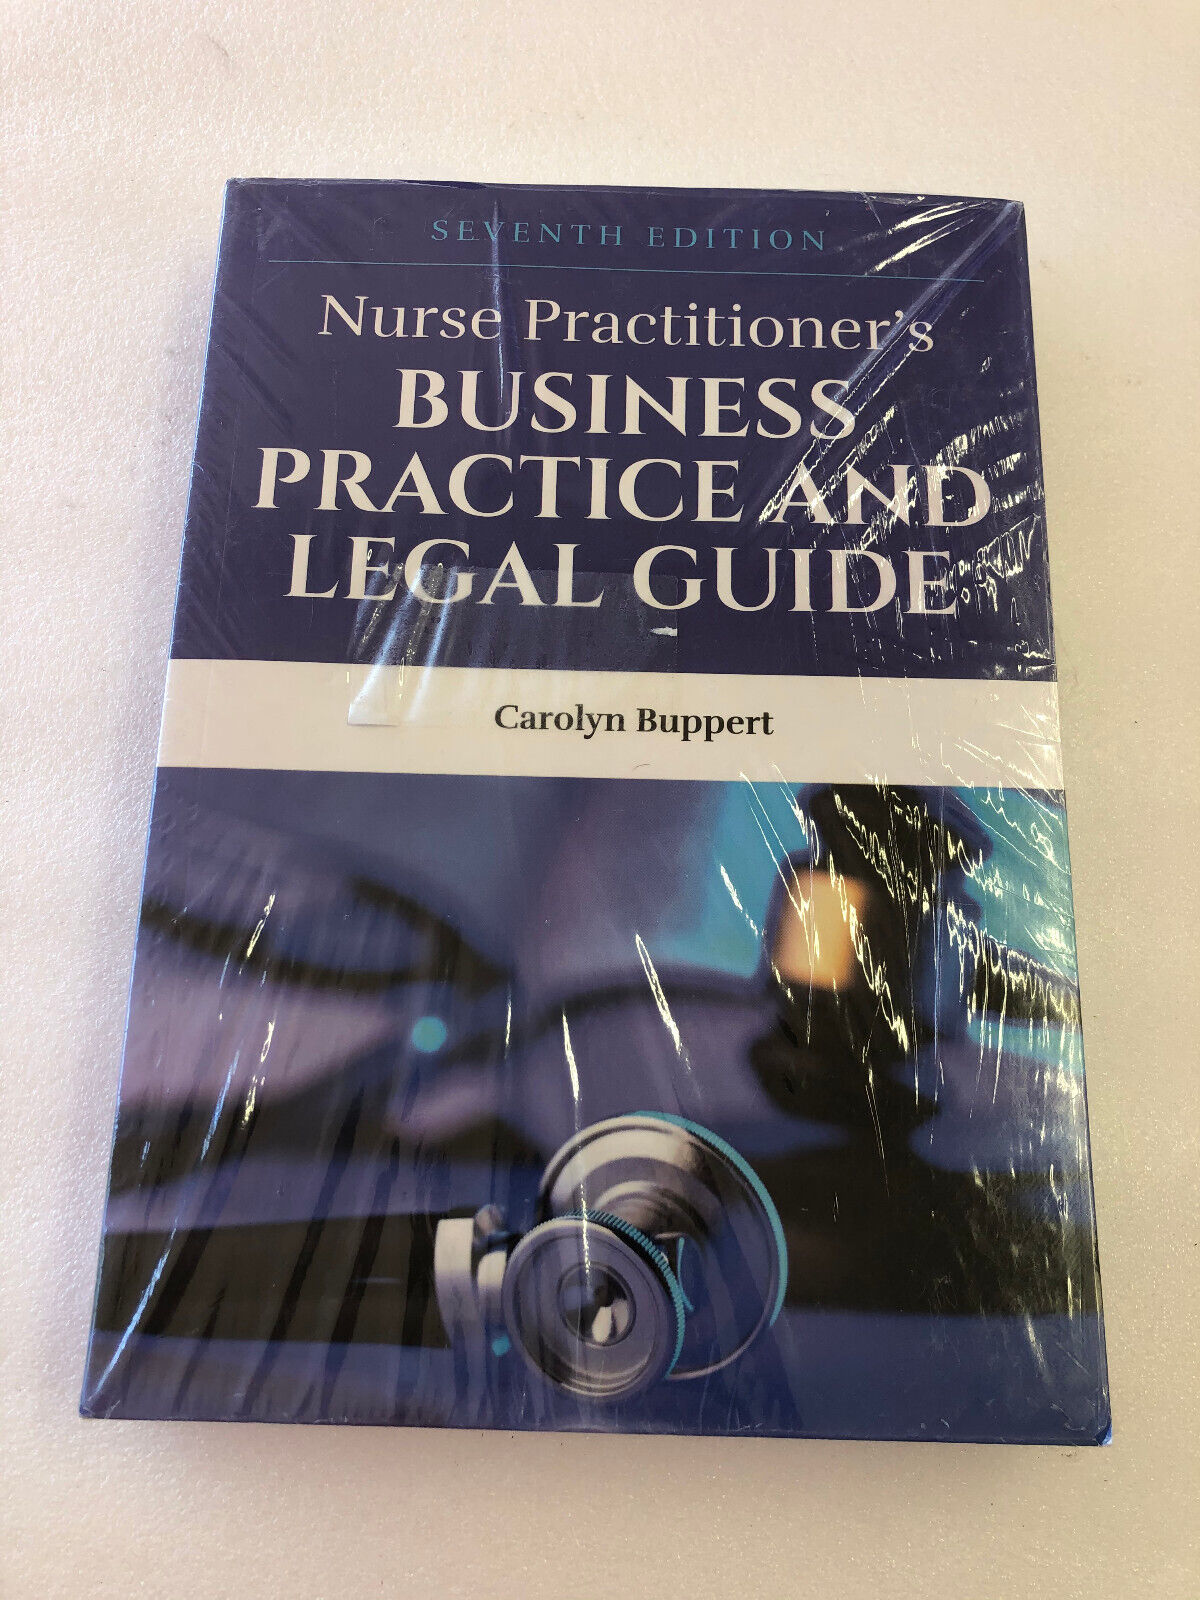 Nurse Practitioner's Business Practice and Legal Guide 7th Ed